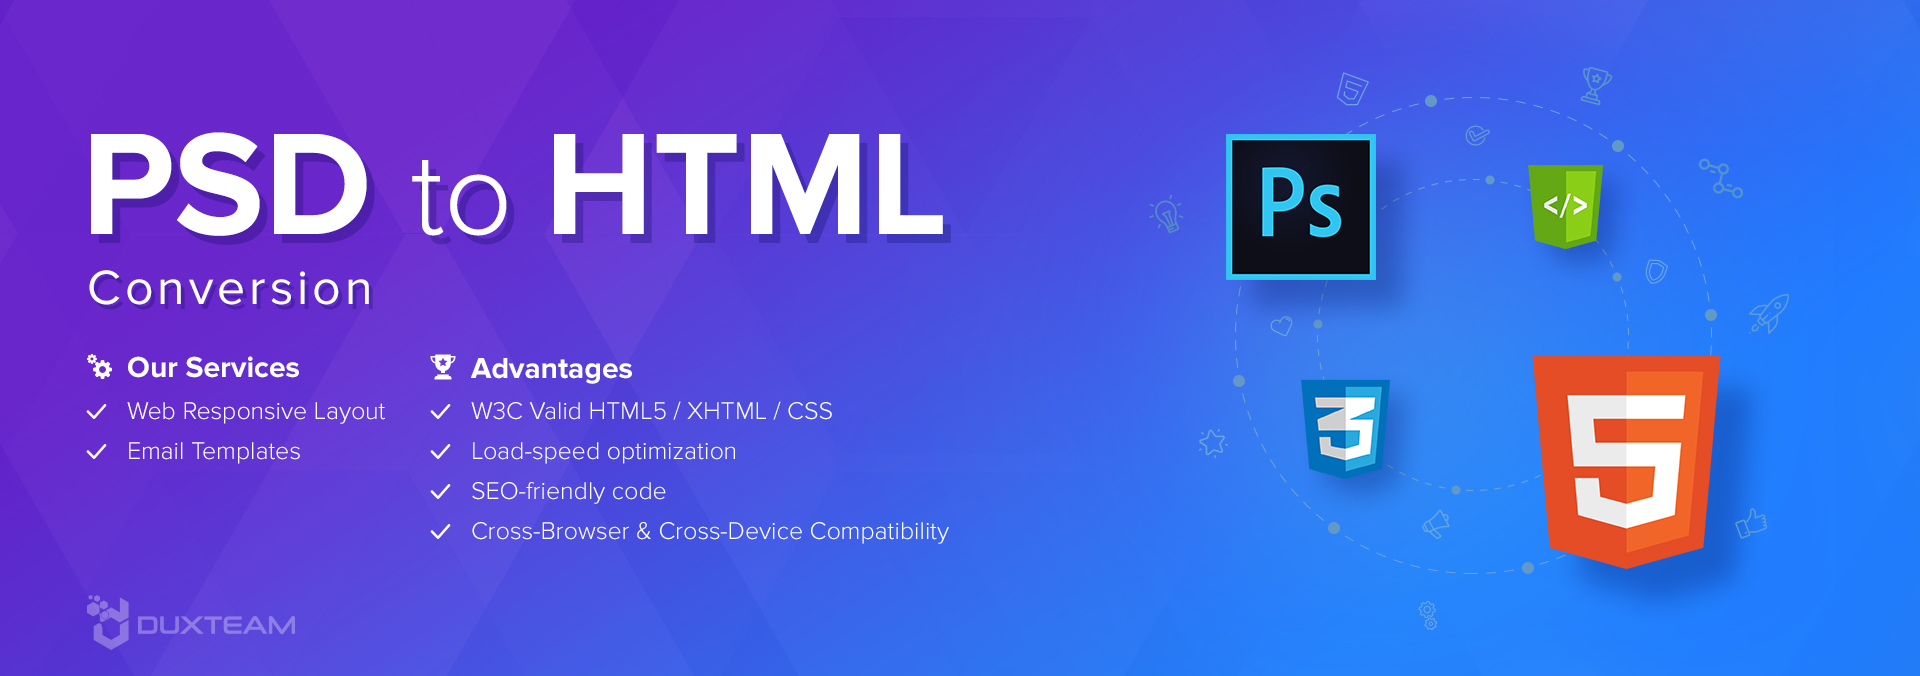 PSD to HTML conversion service